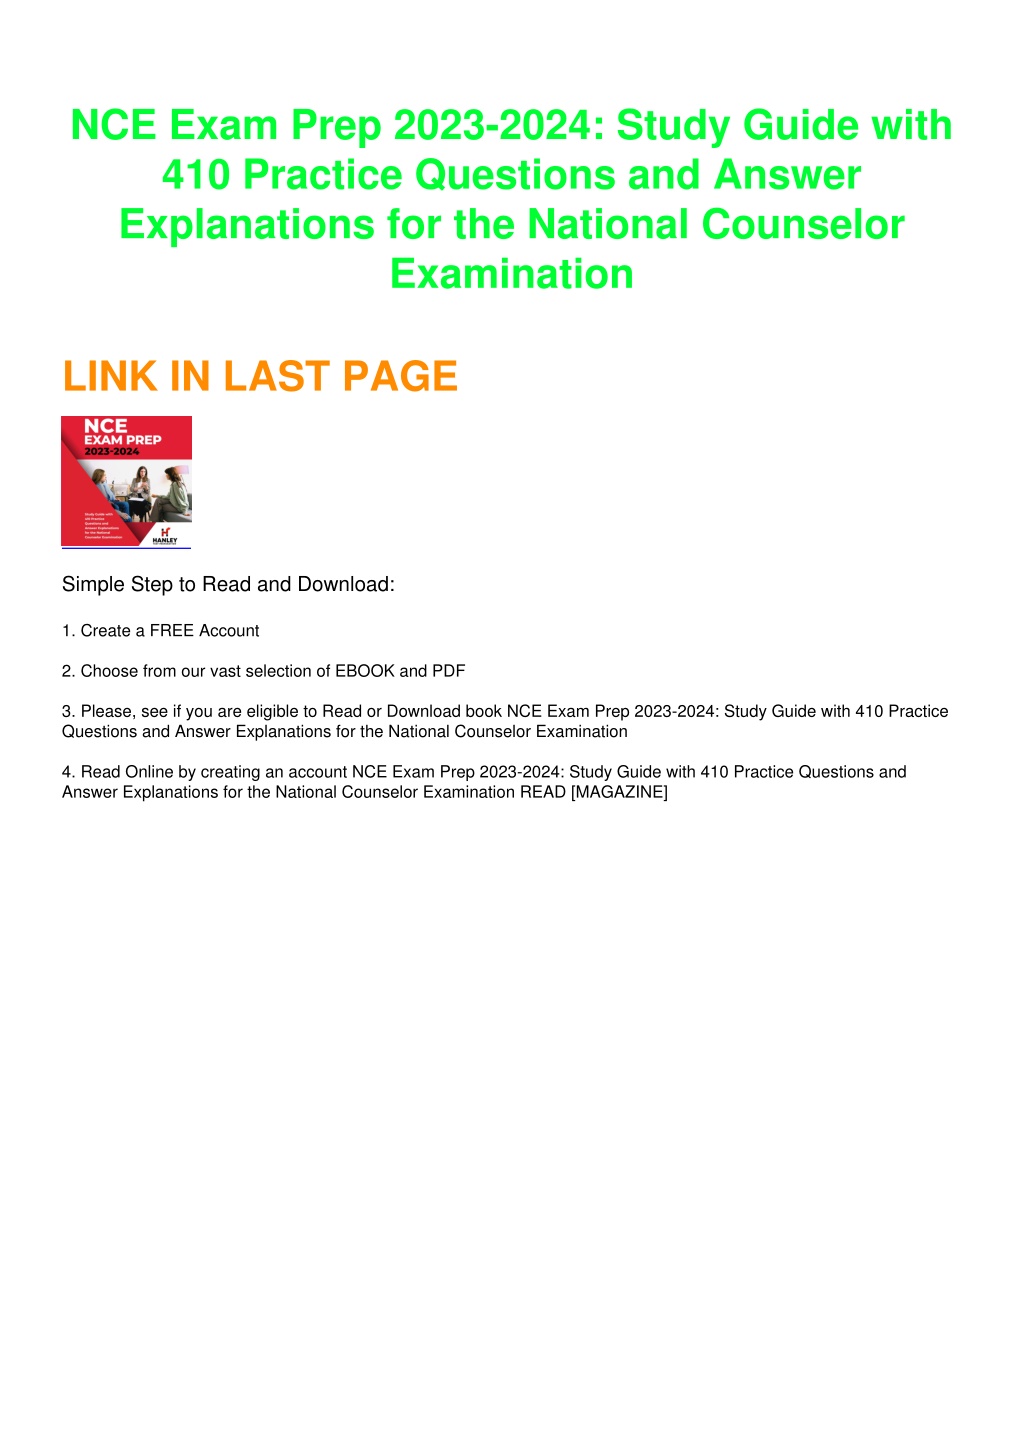 PPT [PDF] DOWNLOAD FREE NCE Exam Prep 20232024 Study Guide with 410 Practice Quest